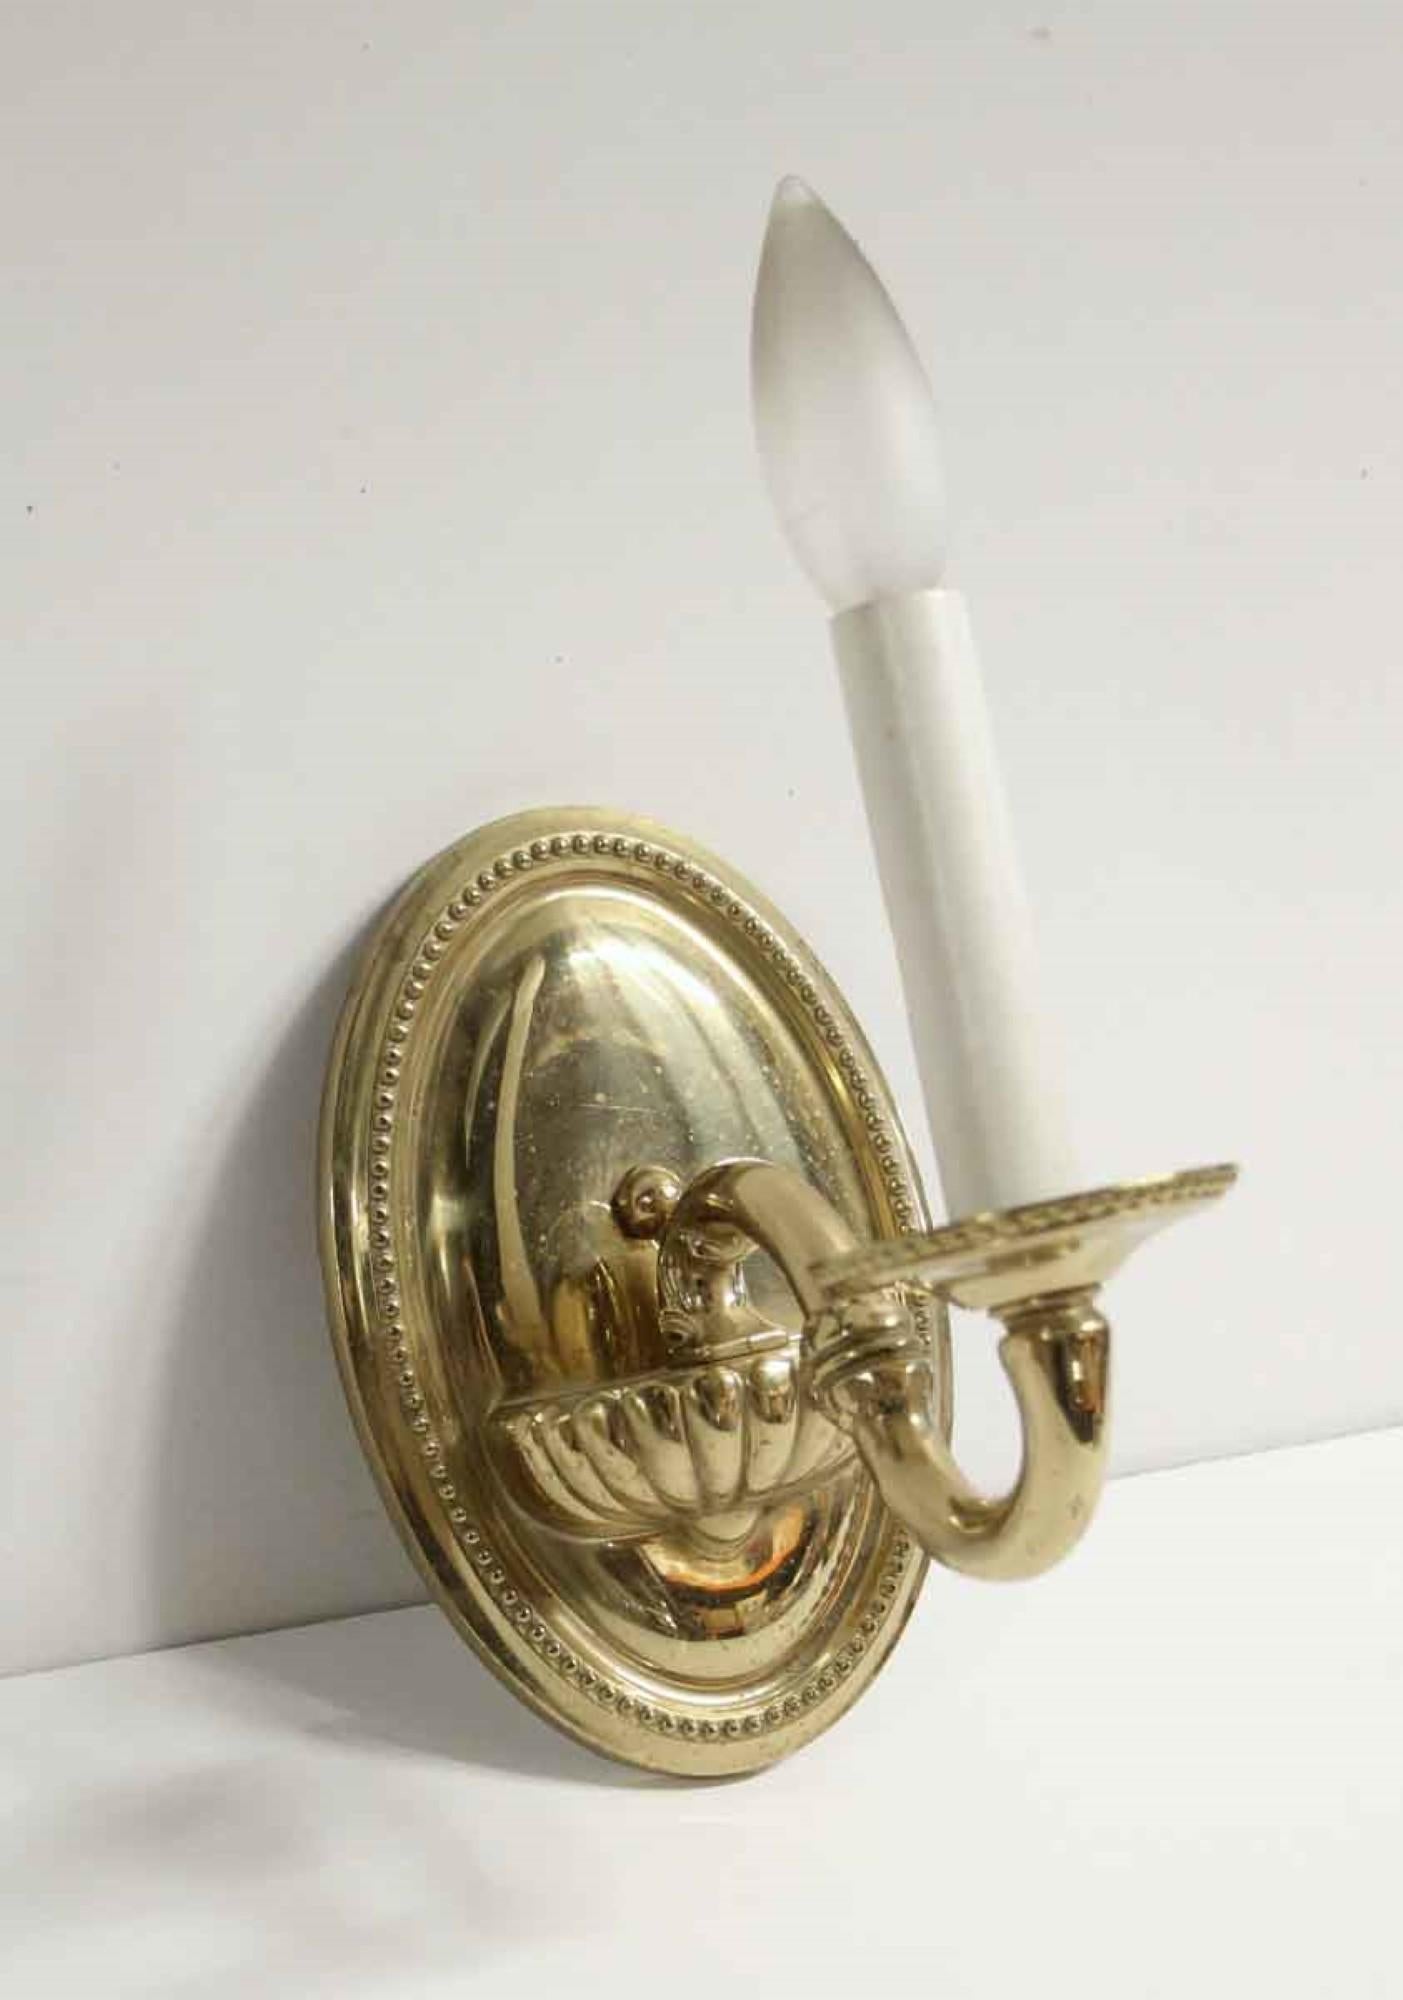 1990s polished brass beaded back plate one-arm sconce featuring a decorative base. Price includes restoration. Waldorf Astoria authenticity card included with your purchase. Small quantity available at time of posting. Priced each. This can be seen